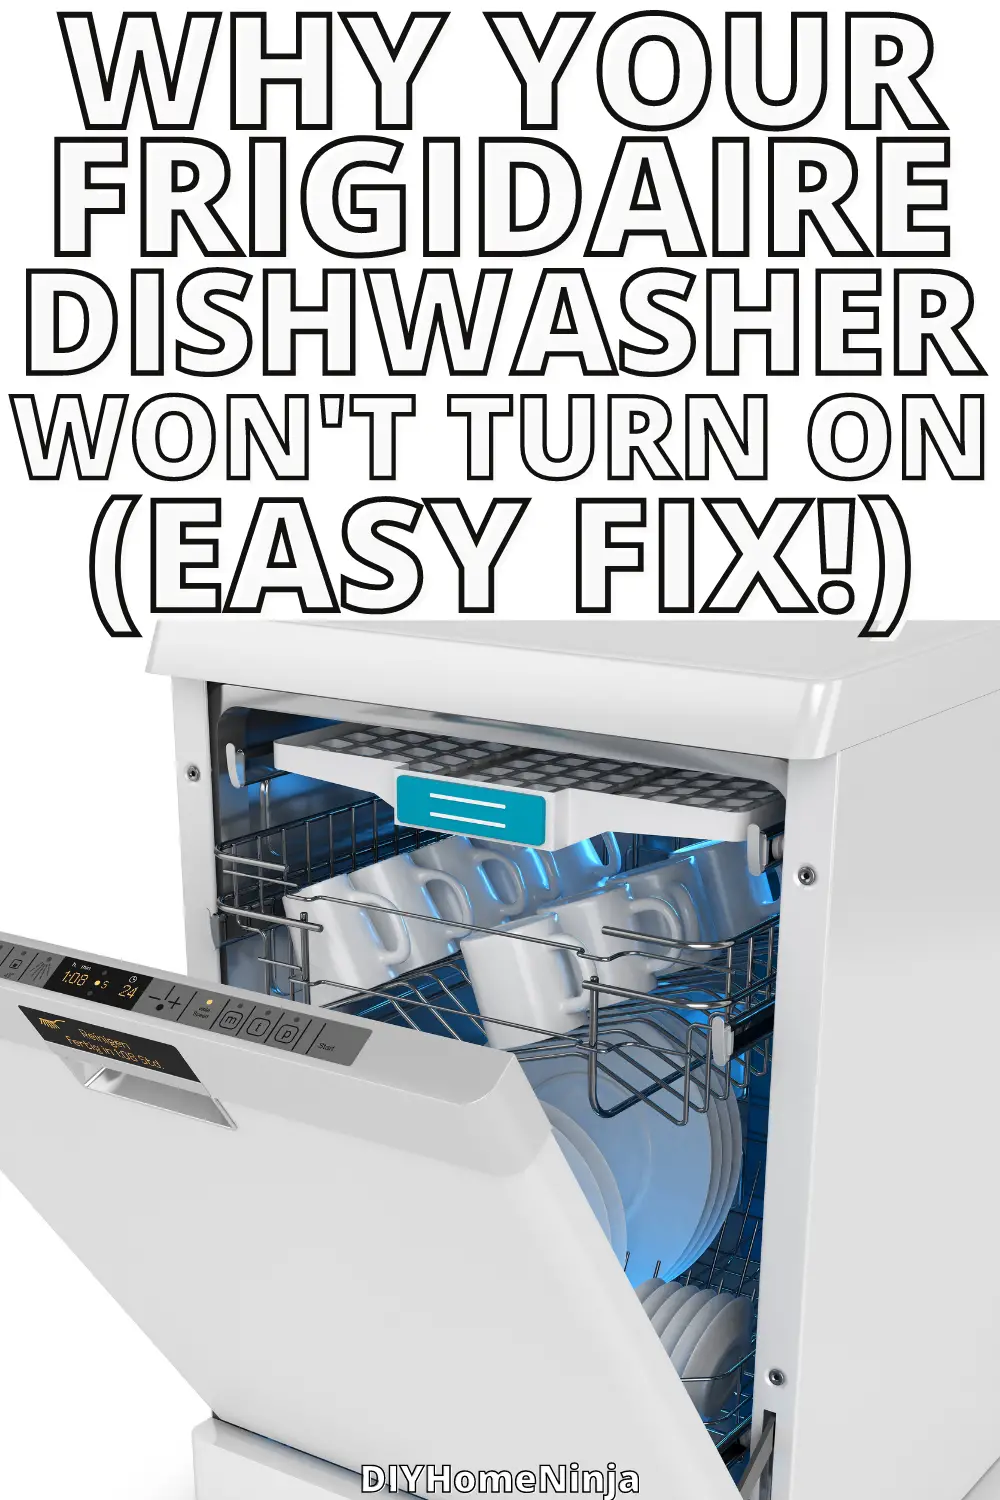 Why Your Frigidaire Dishwasher Won't Turn On No Lights! (EASY FIX)